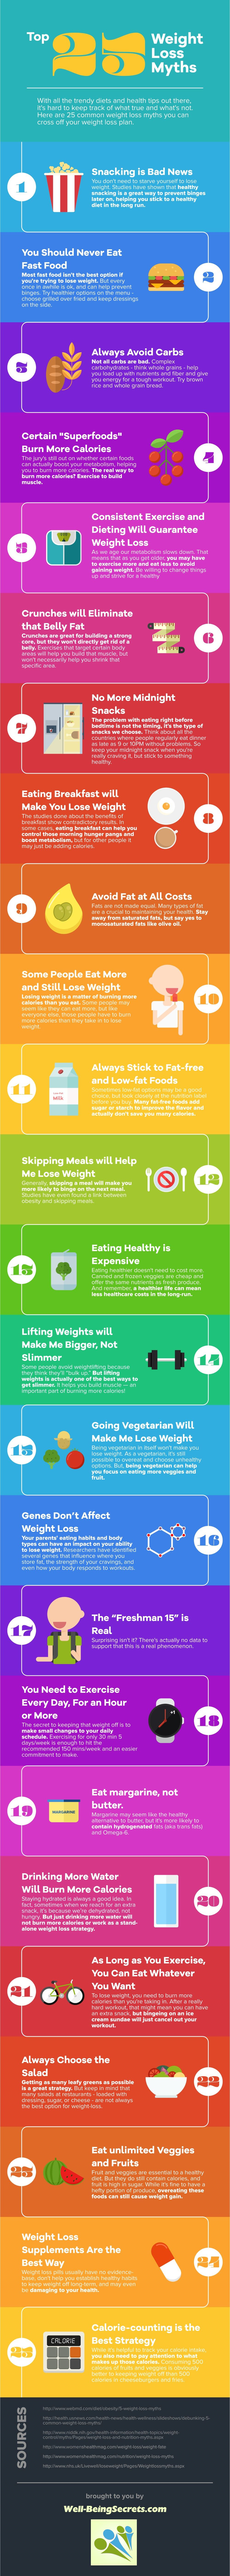 Top 25 Weight Loss Myths Infographic